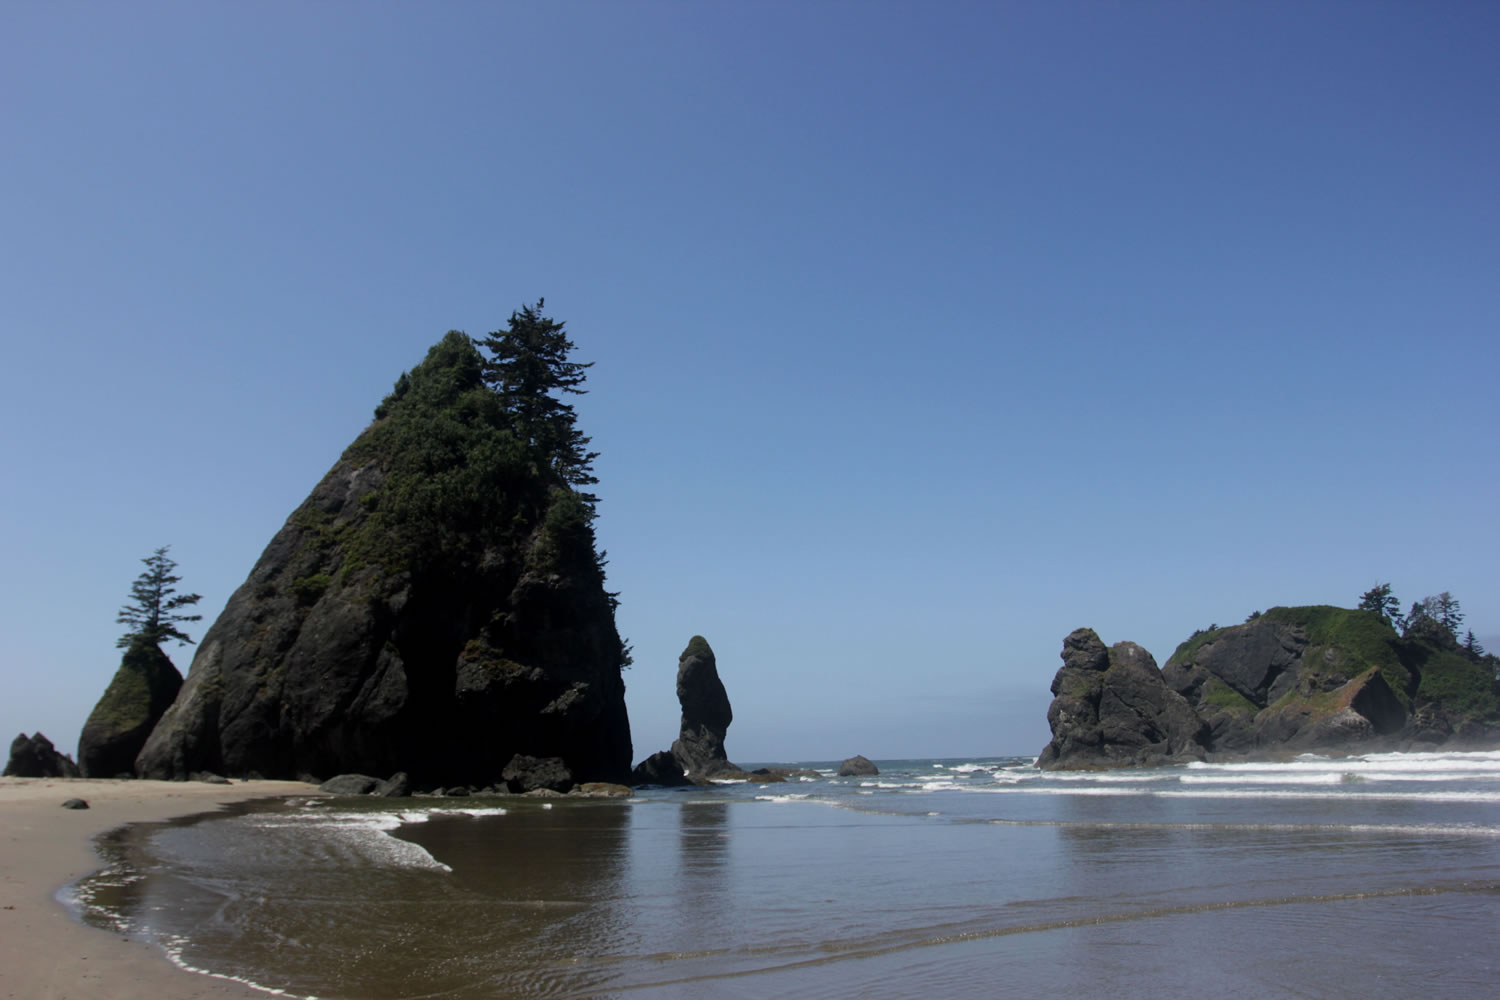 Sea rock formations known as the Point of Archers stand under the afternoon sun near Shi Shi Beach in Washington state's Olympic National Parks. Point of Archers offers hikers and campers great spots to explore sea creatures during low tide.